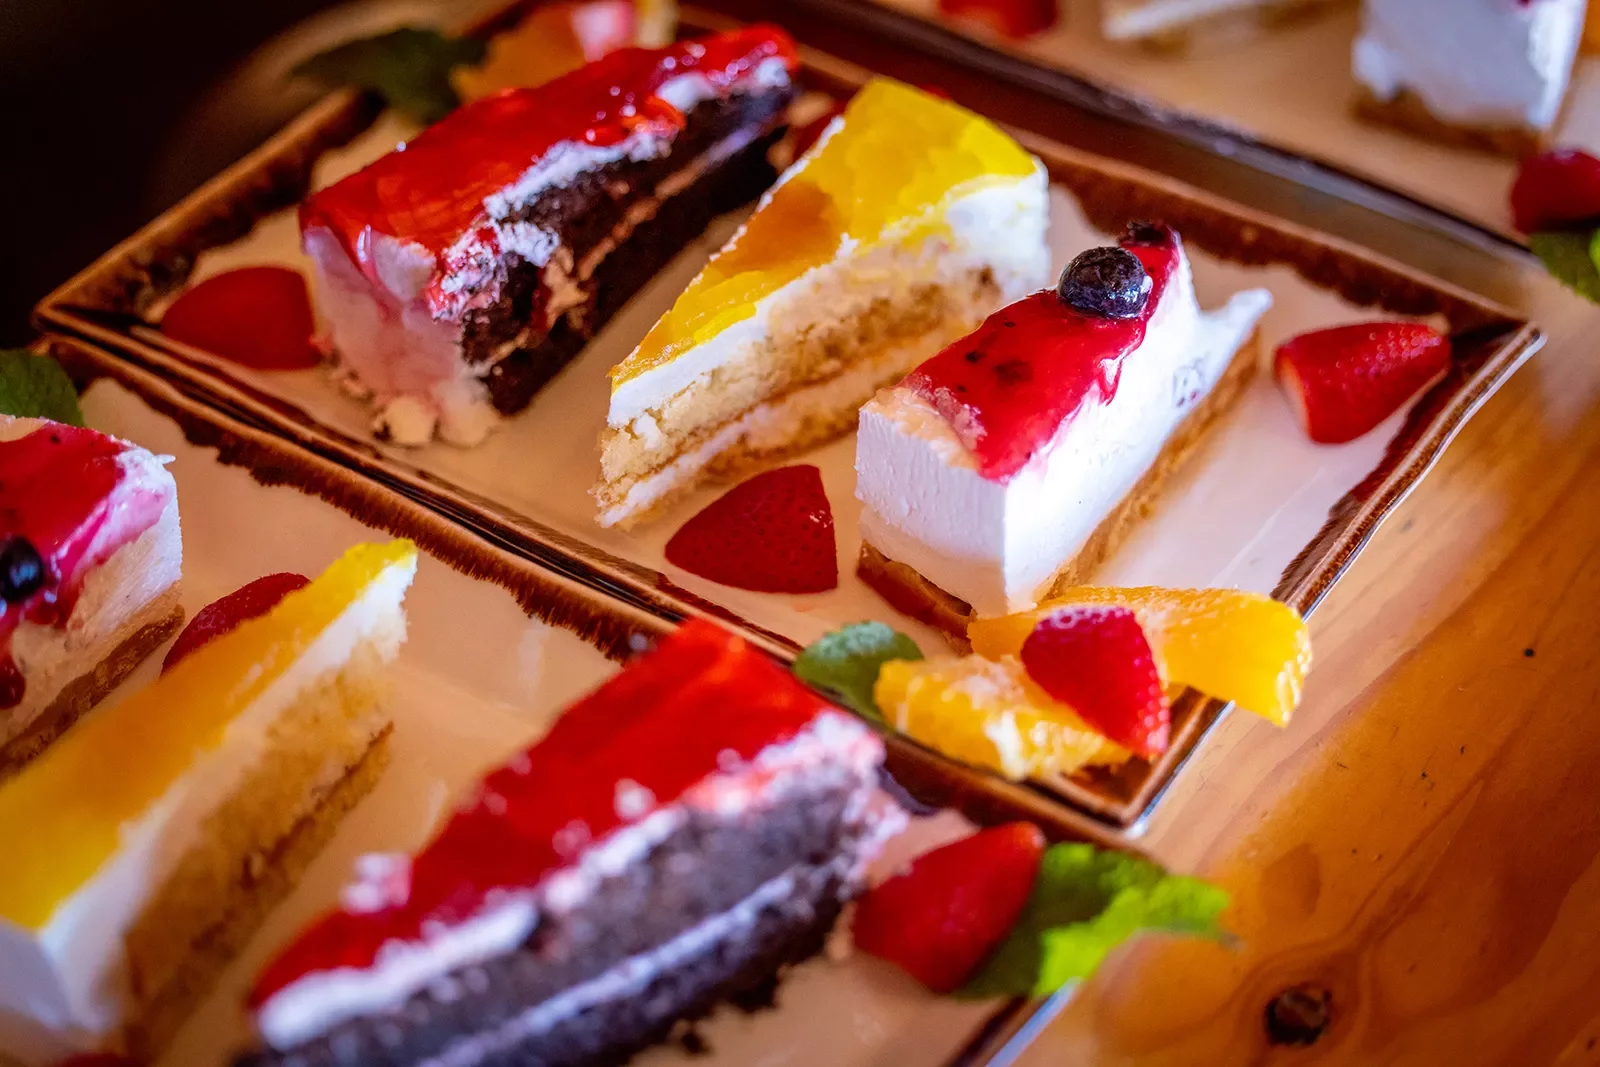 Colorful desserts arranged on a tray